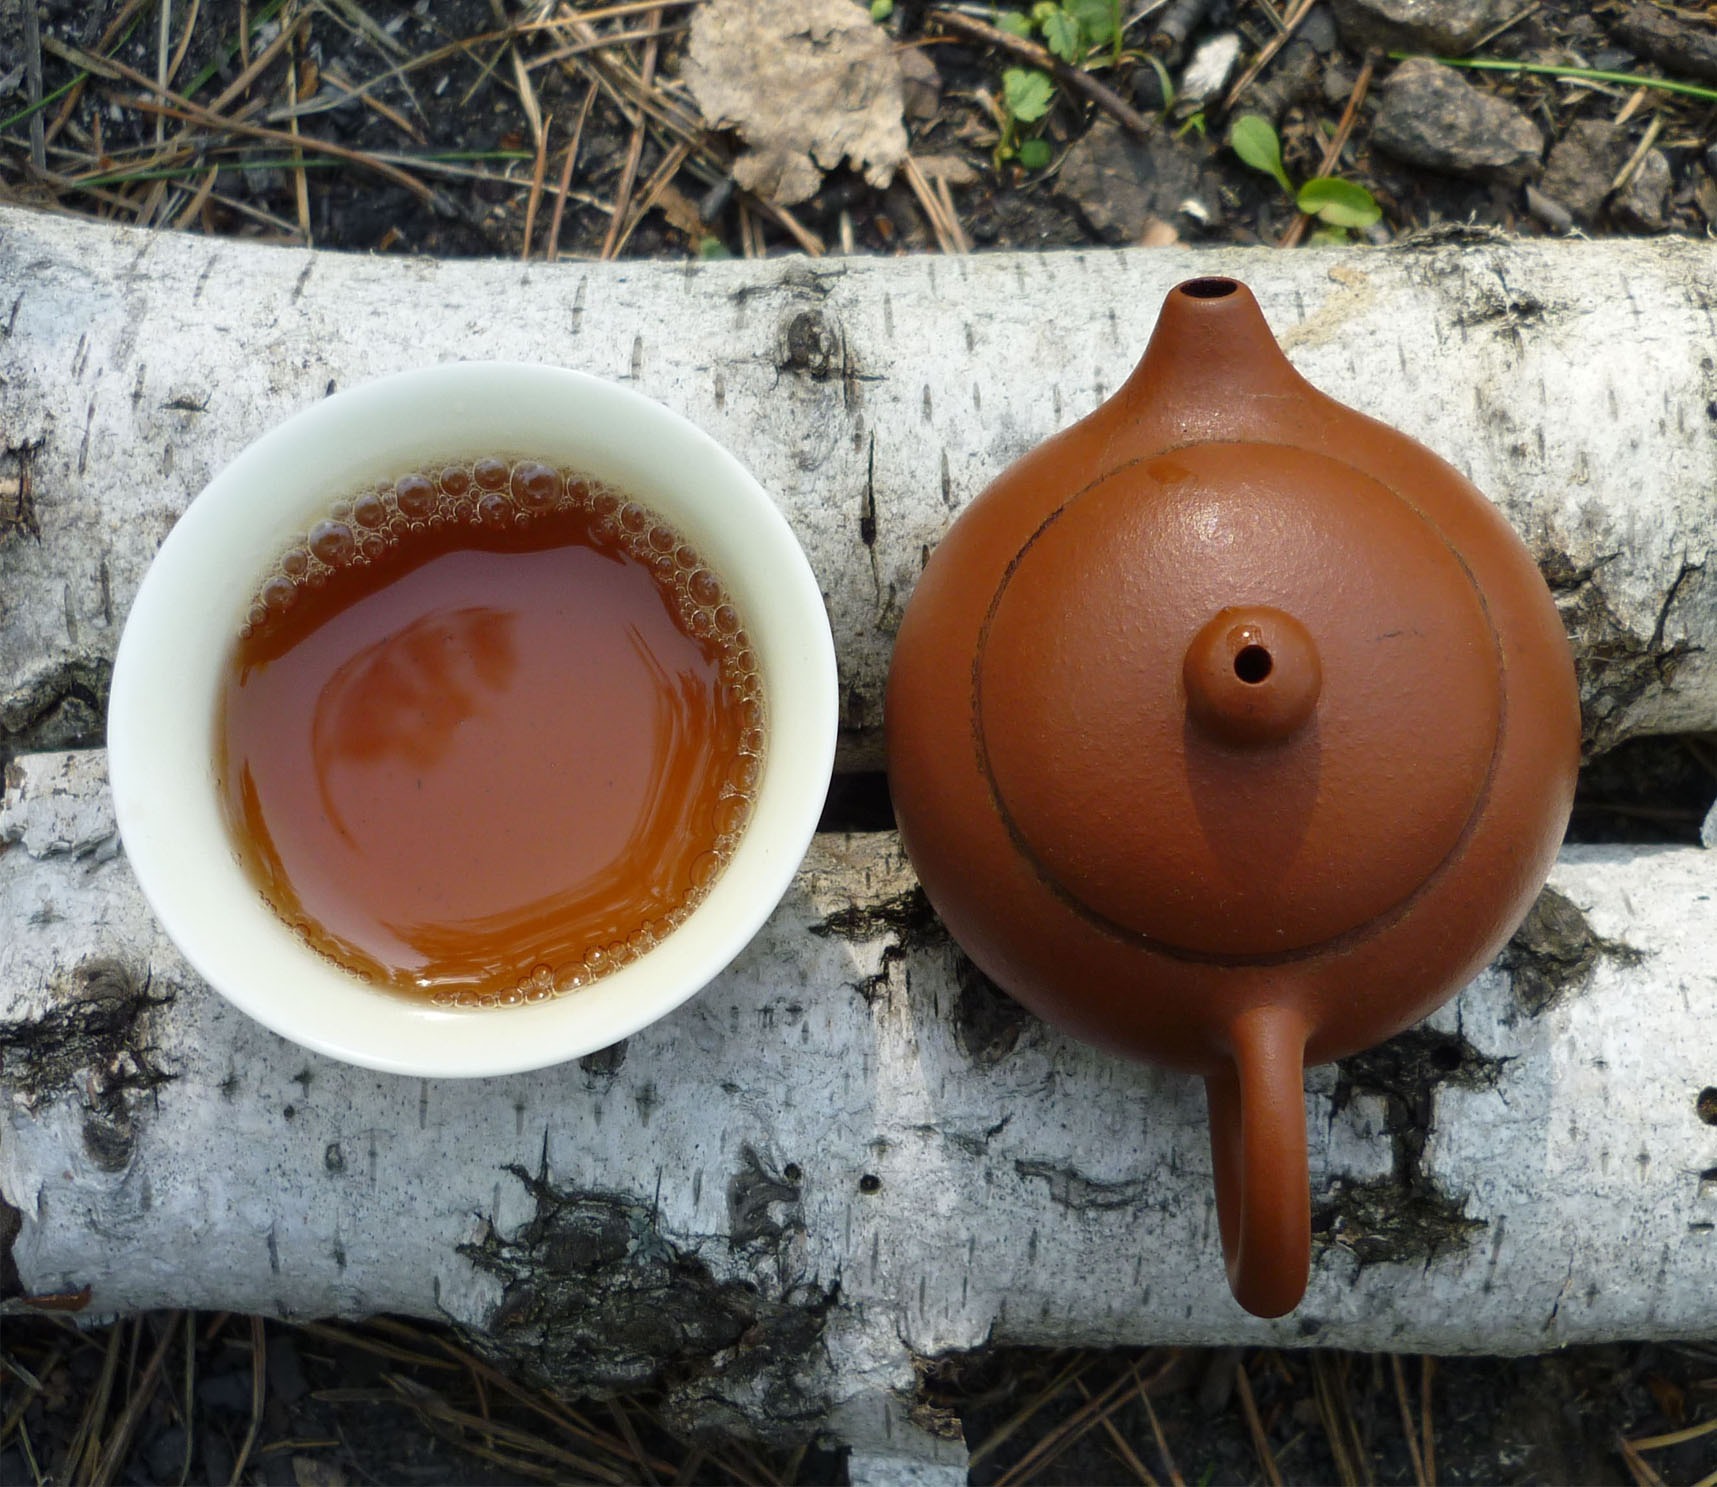 Oolong Tea - Discover the benefits